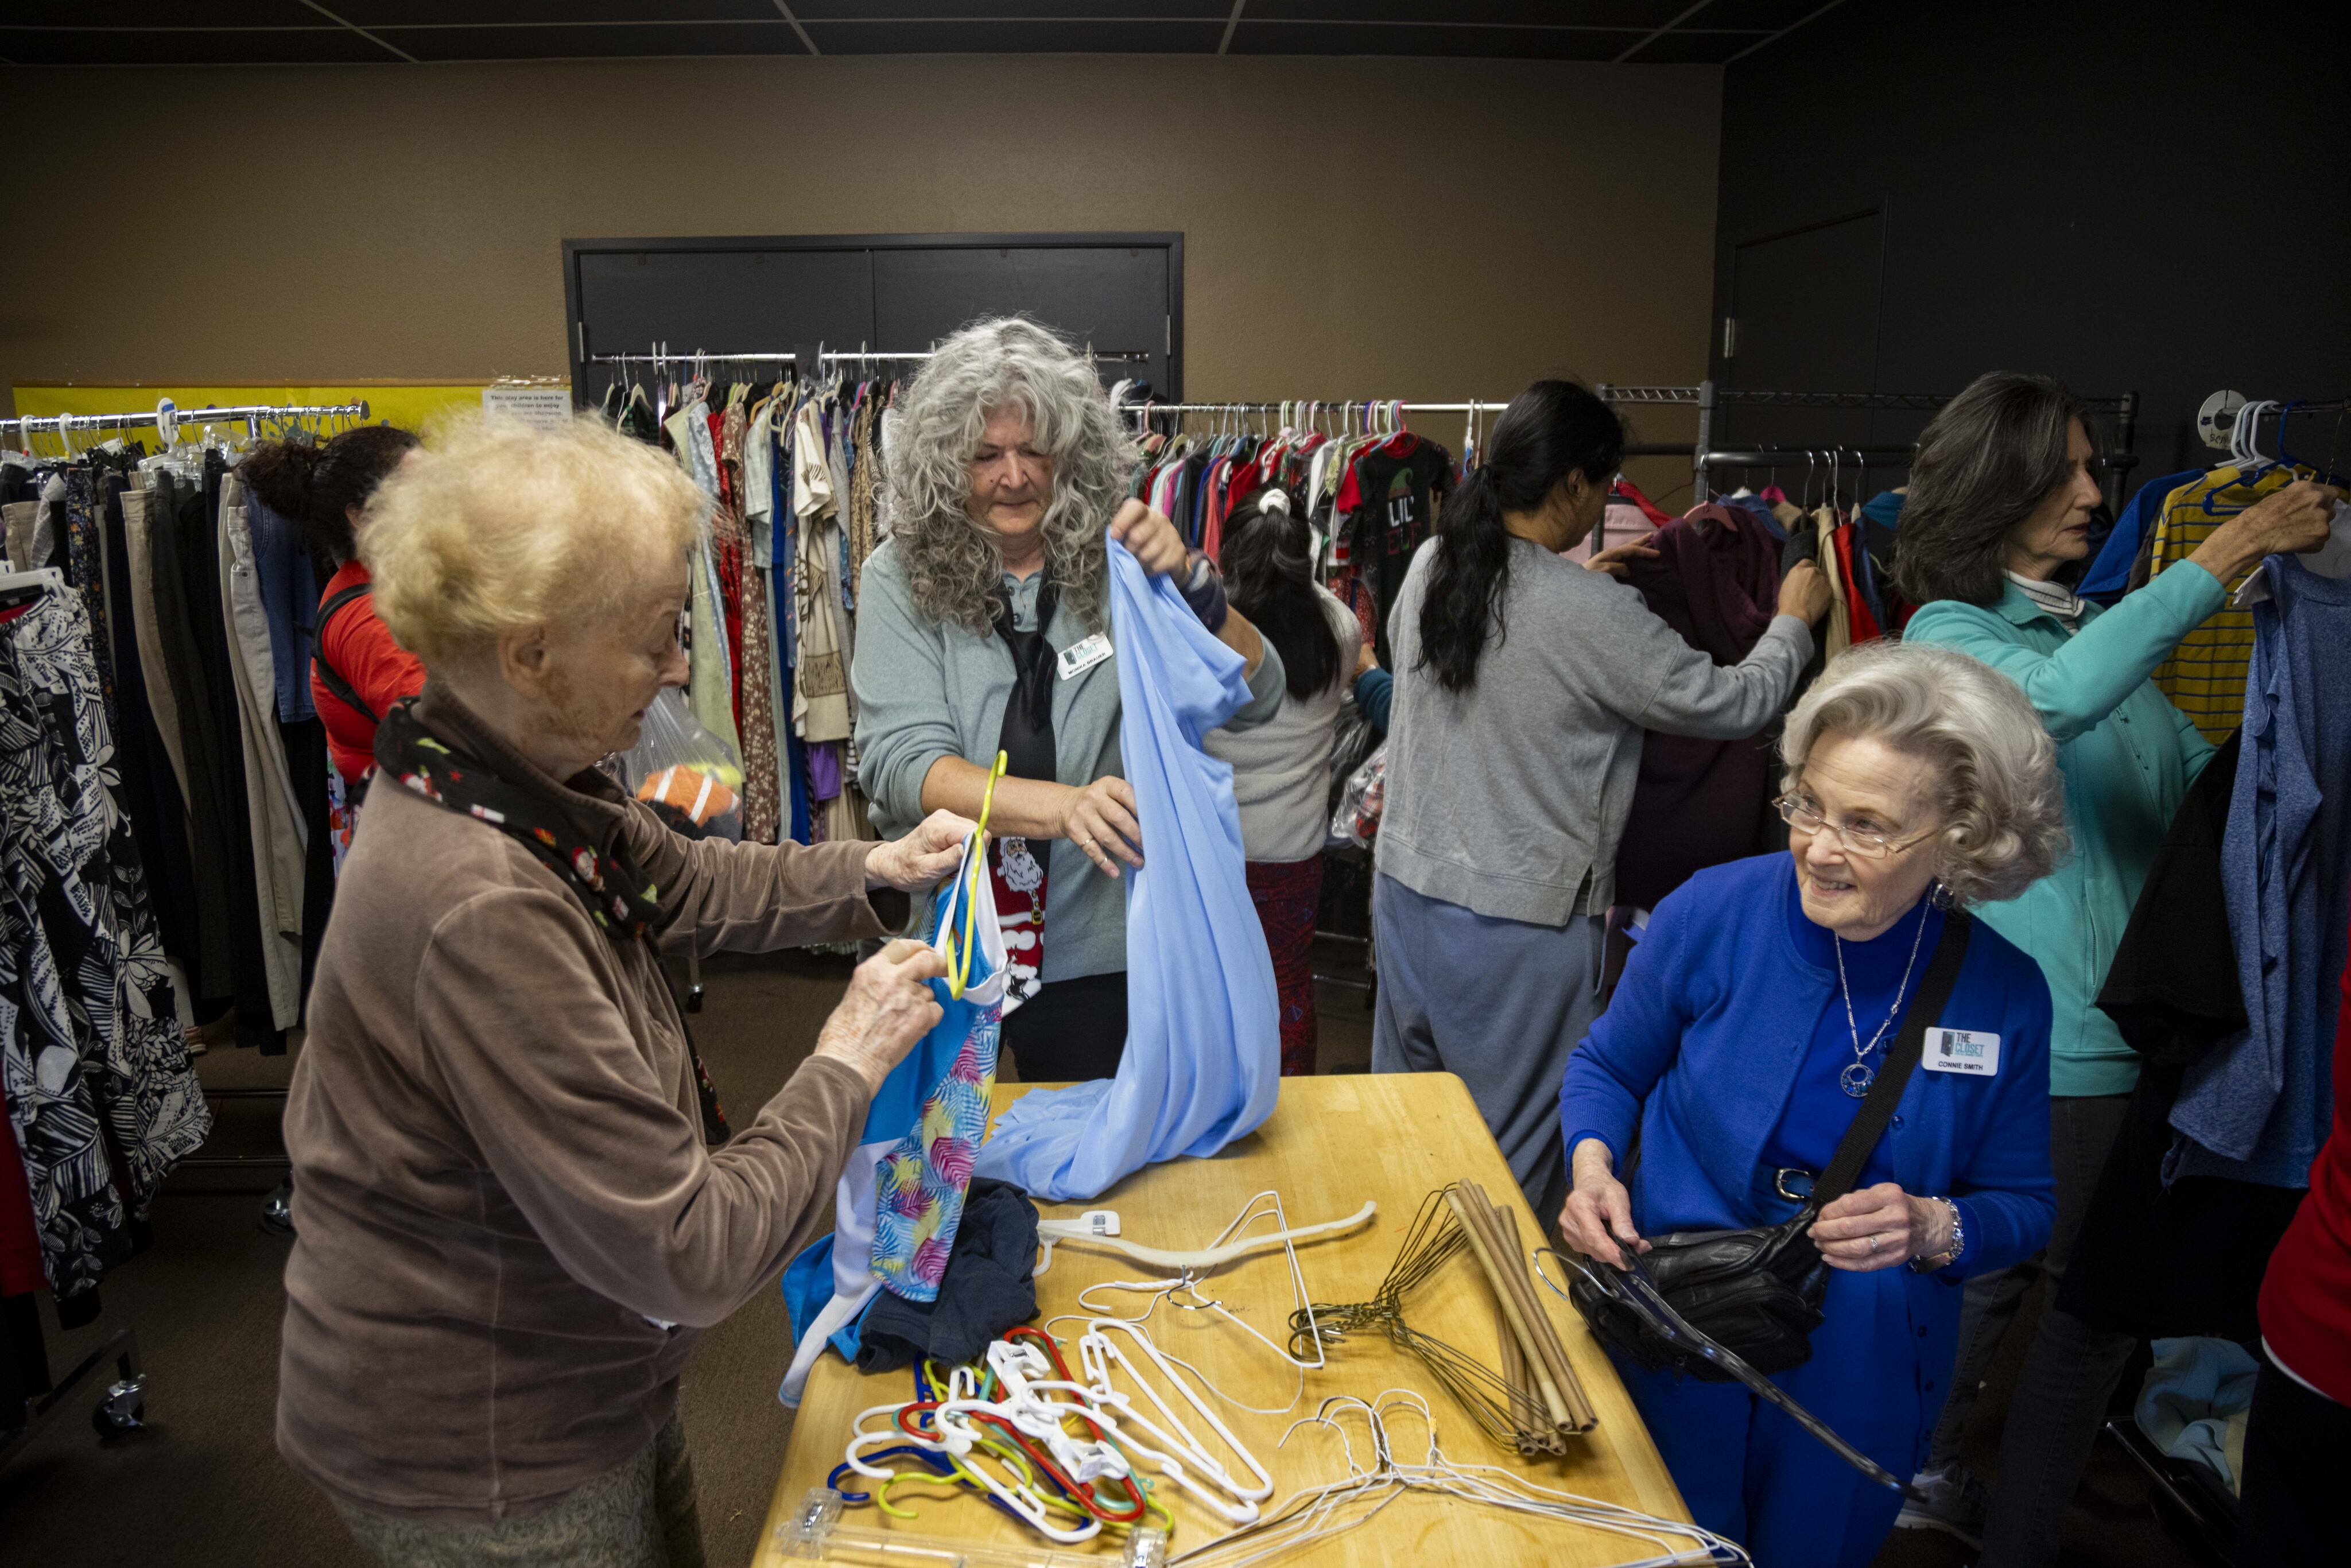 Photos: Inside The Closet at The Hill, a donation center in Plano